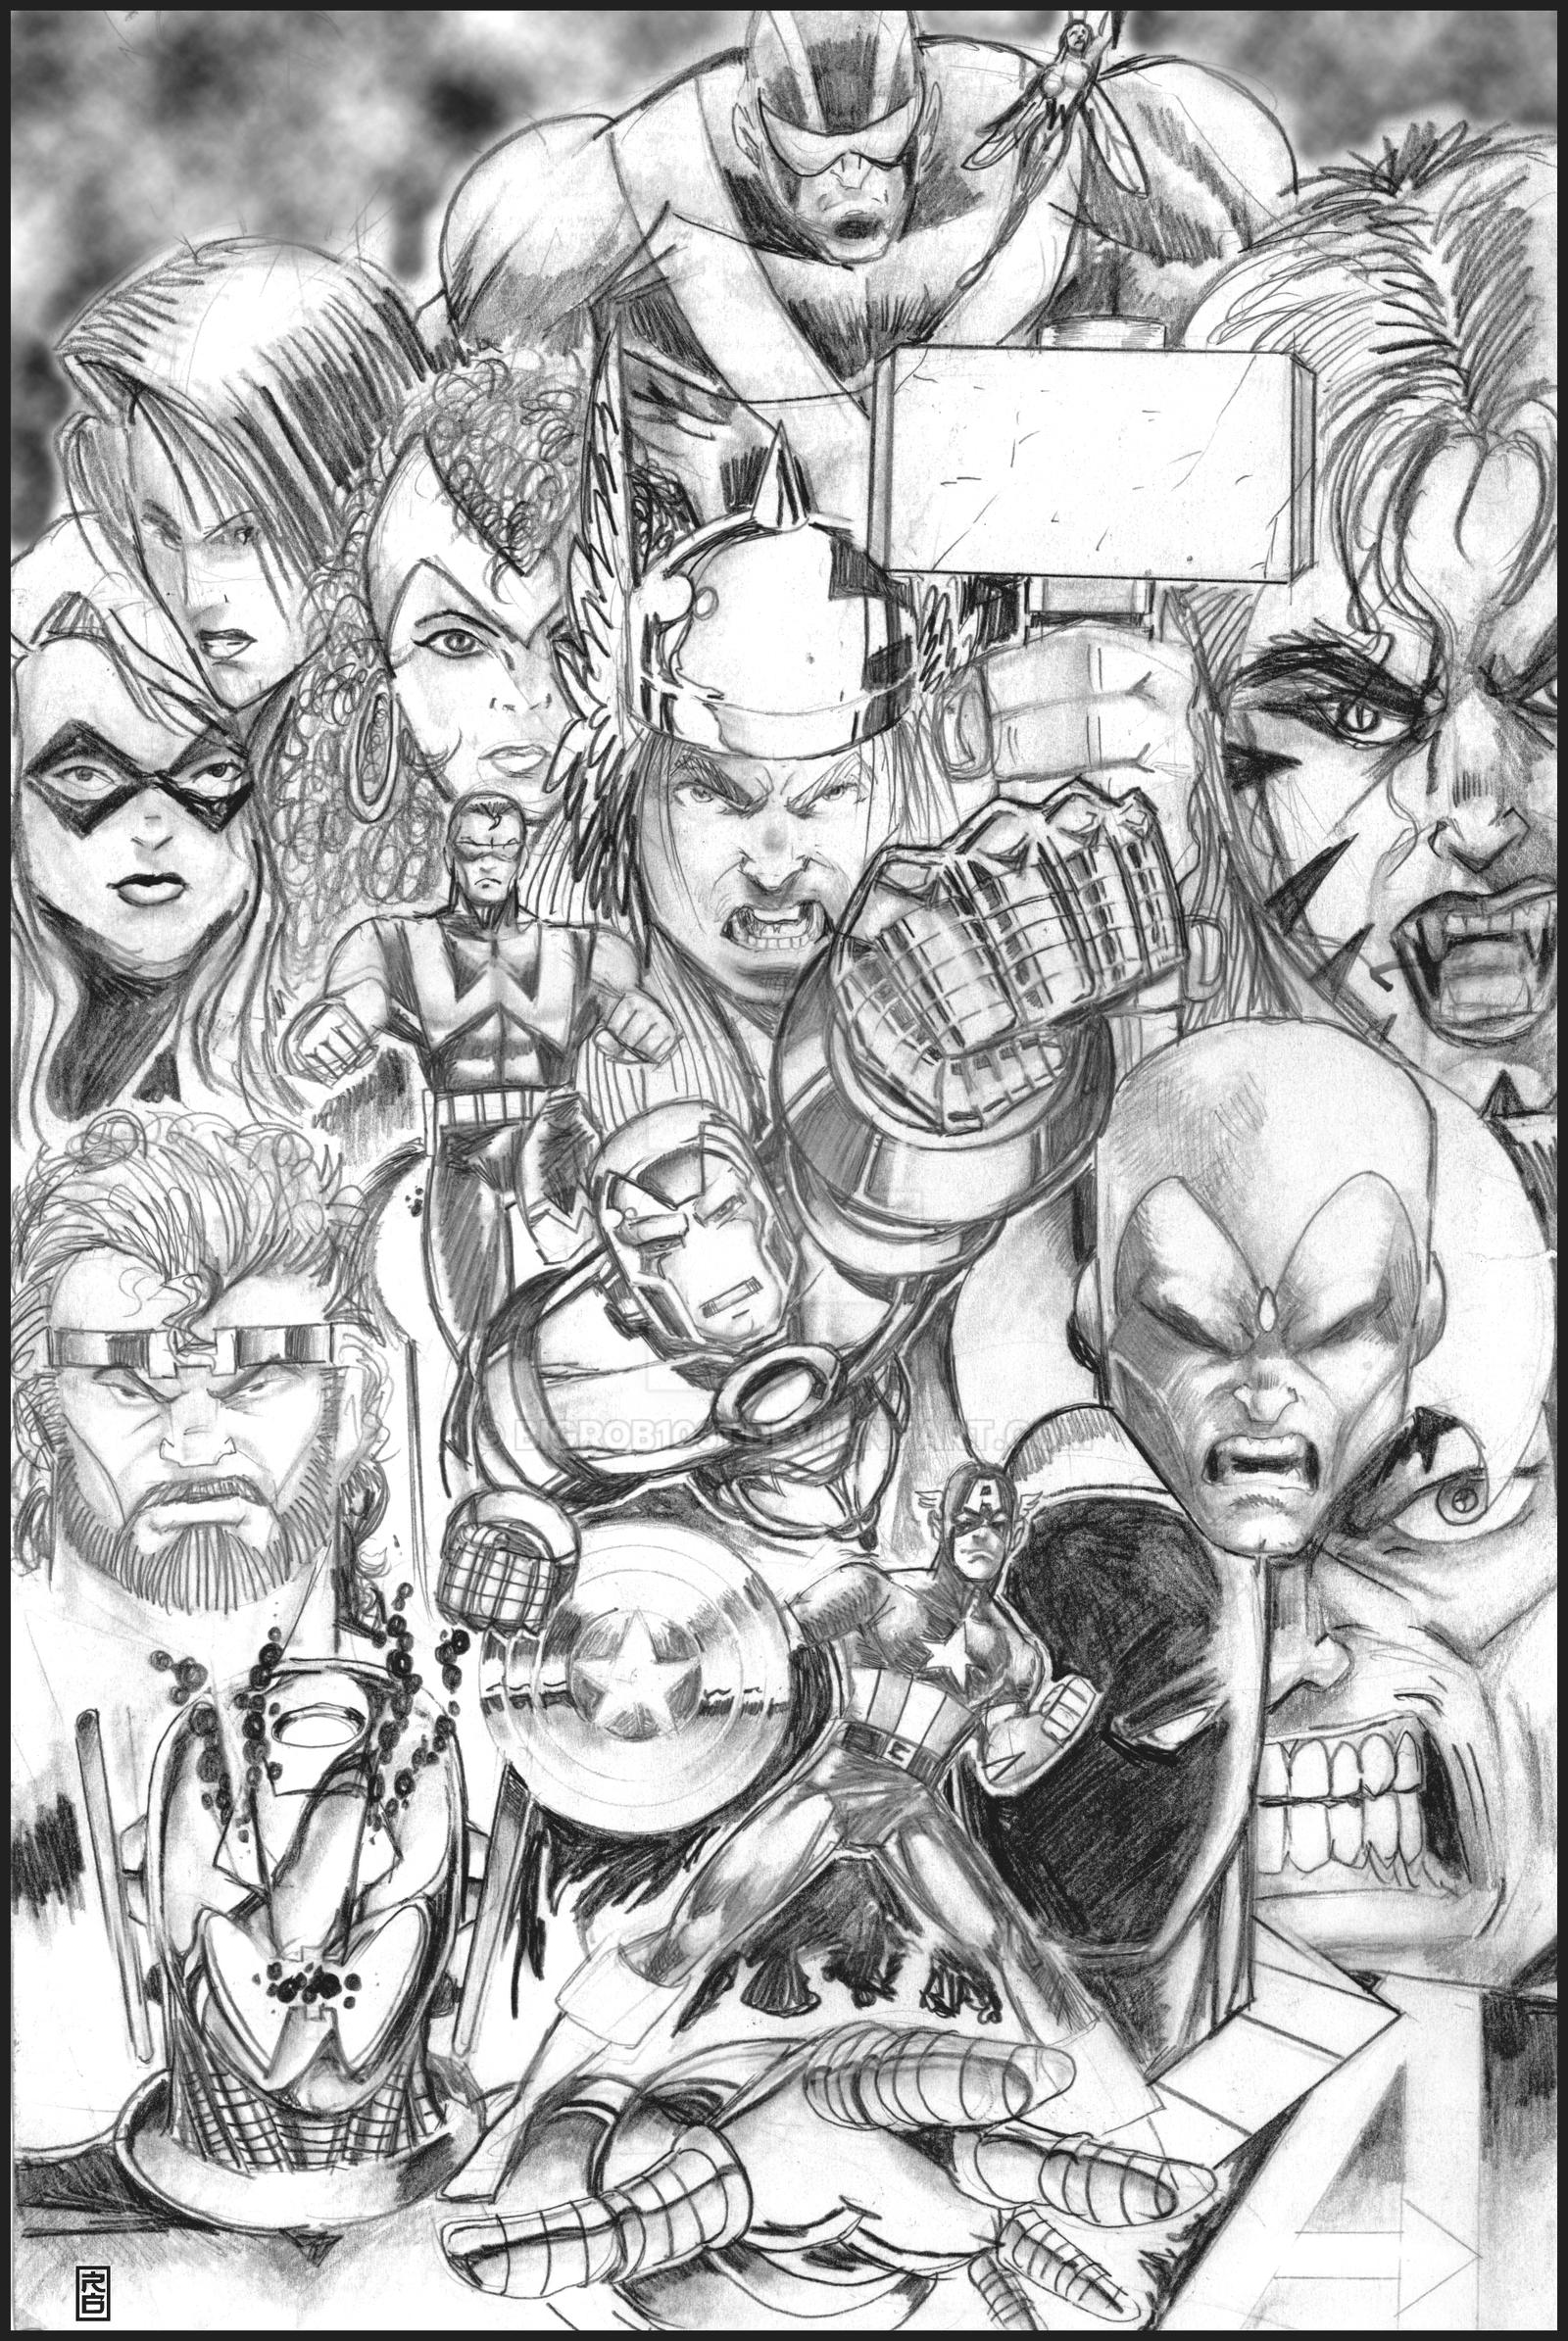 The Avengers in pencil by BigRob1031 on DeviantArt